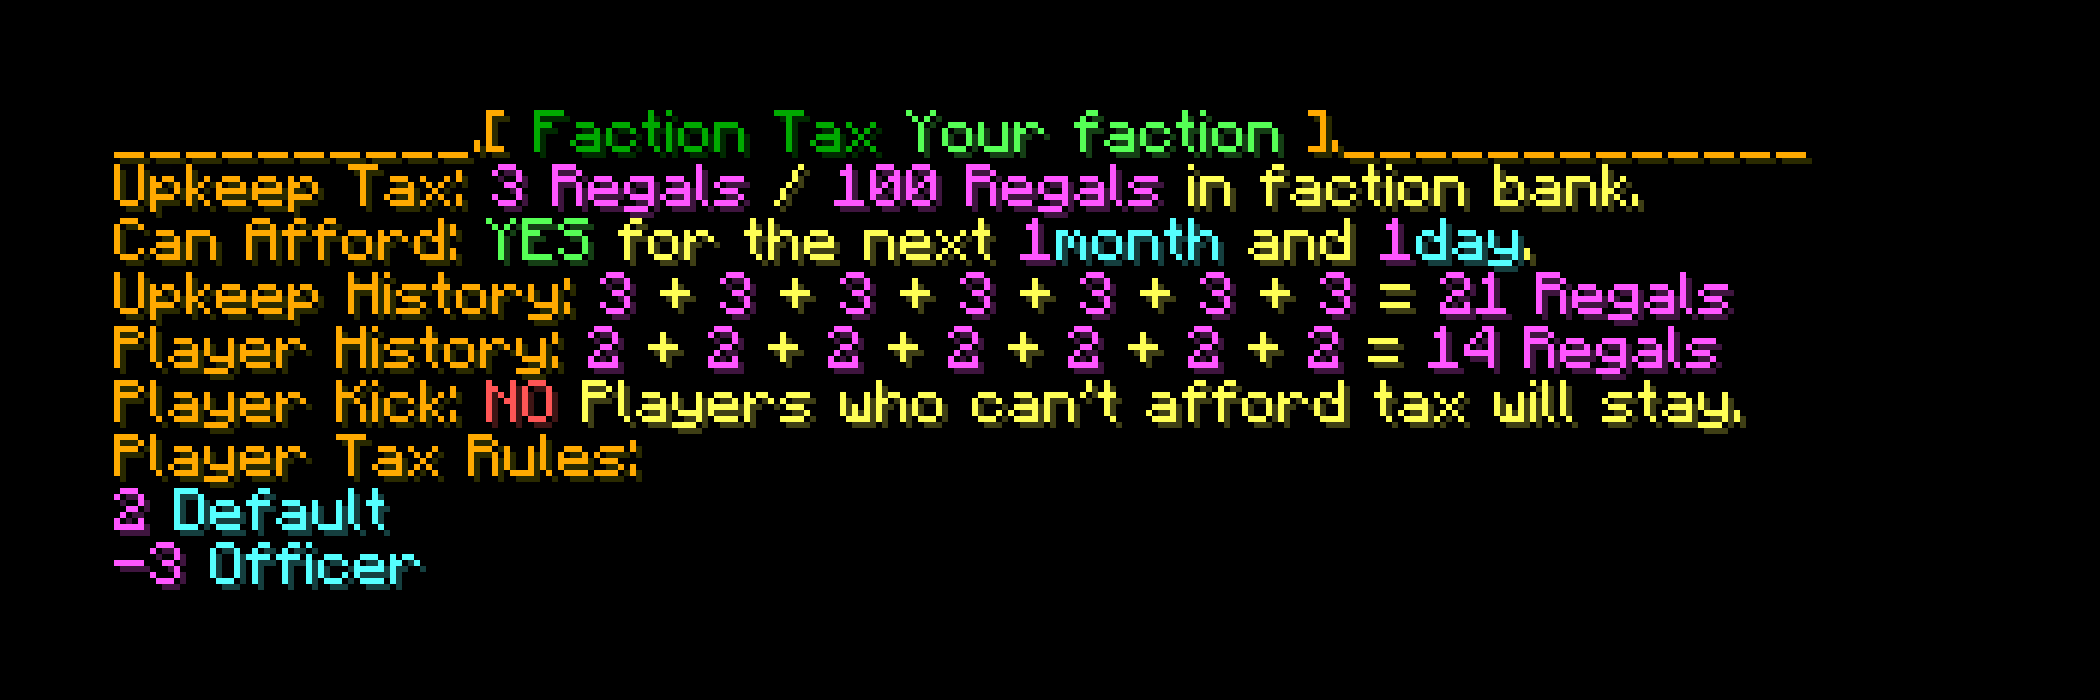 factionstax-command-faction.png